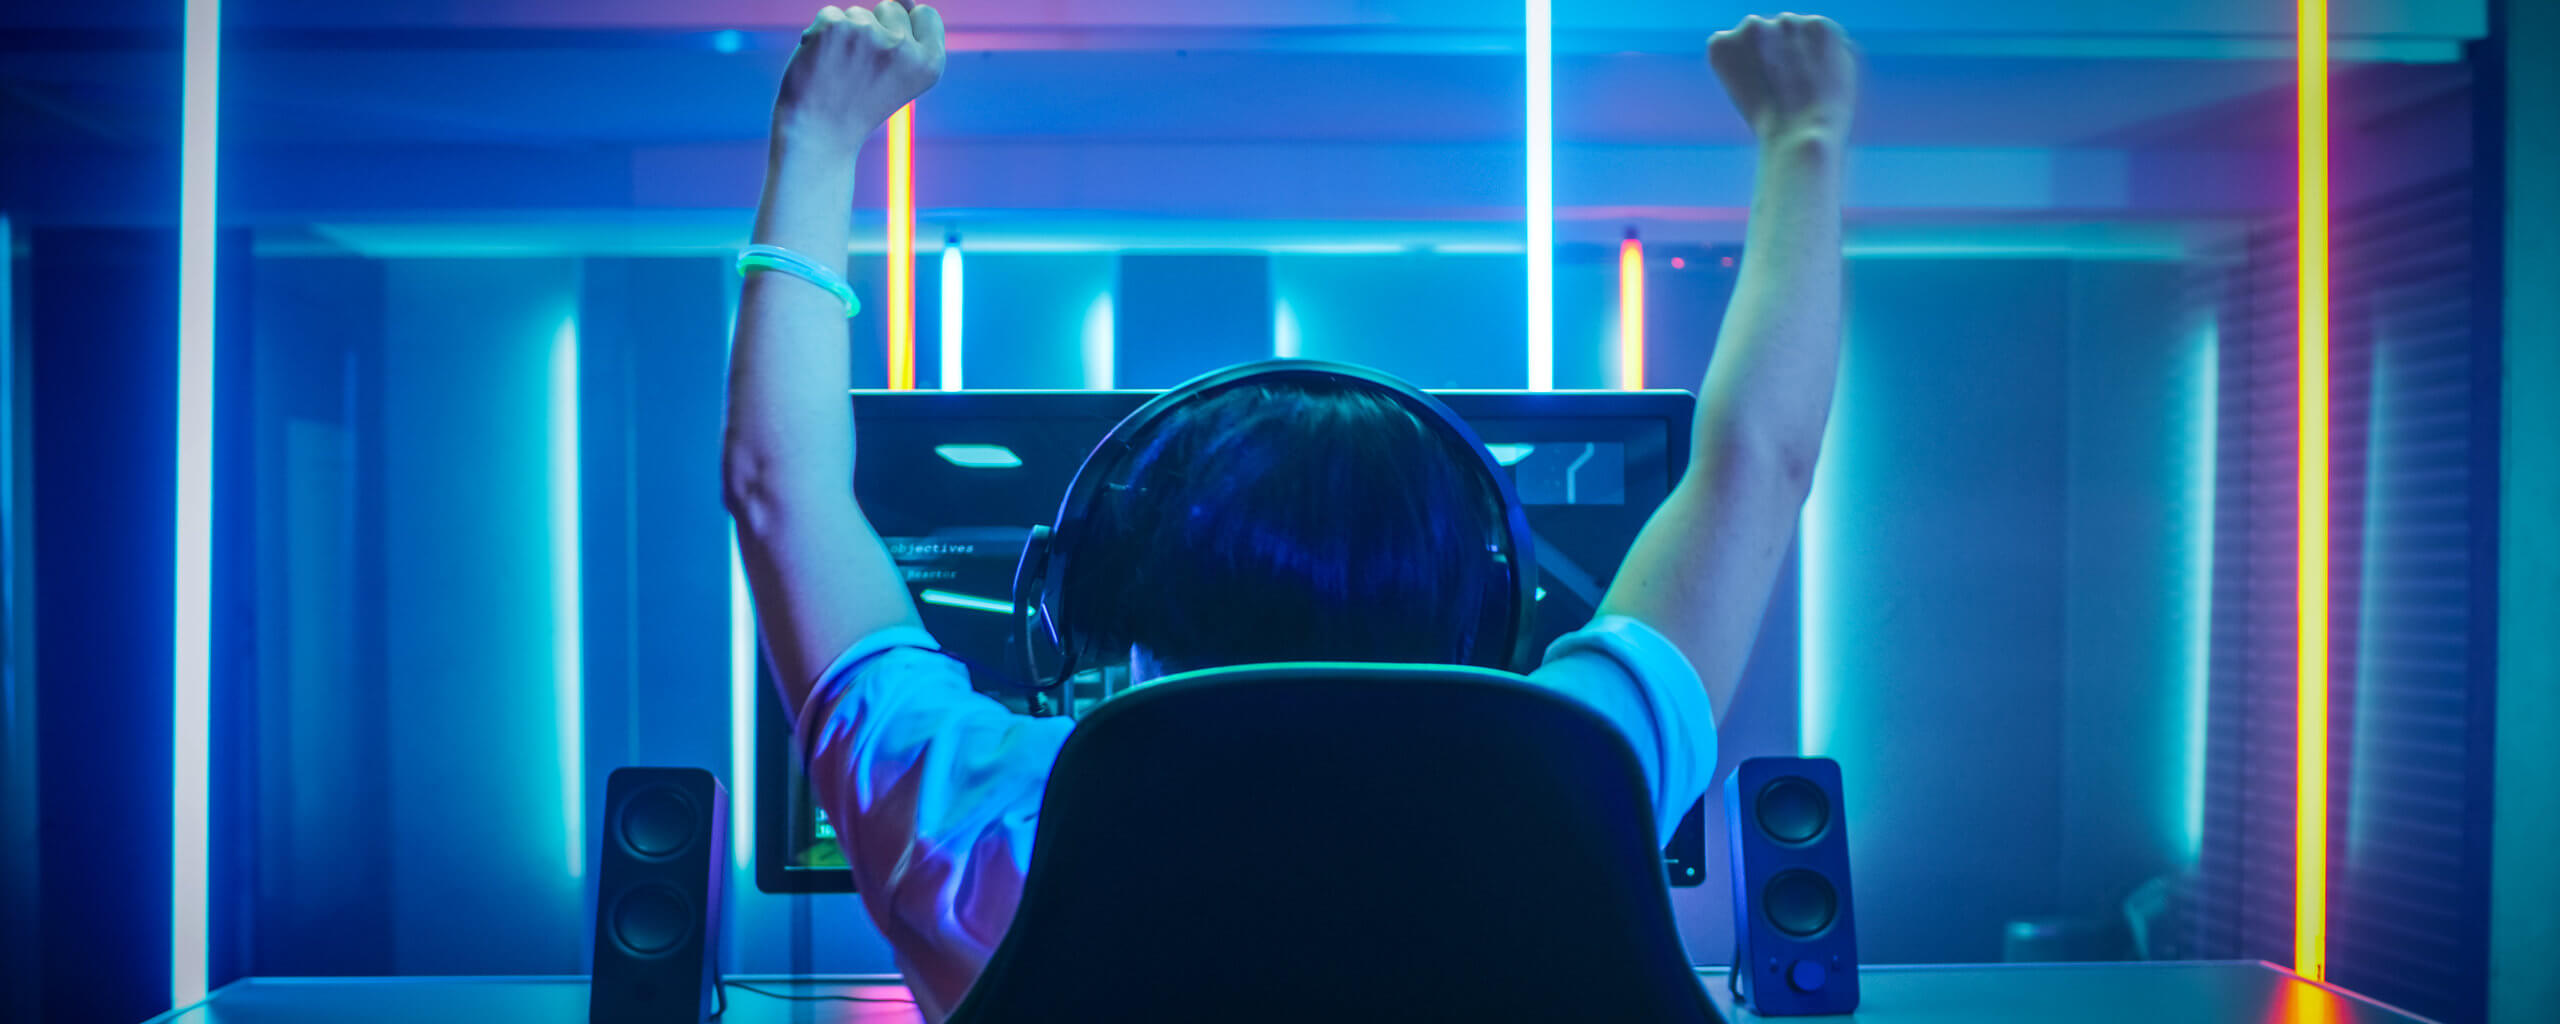 gamer in a winning pose with hands in the air